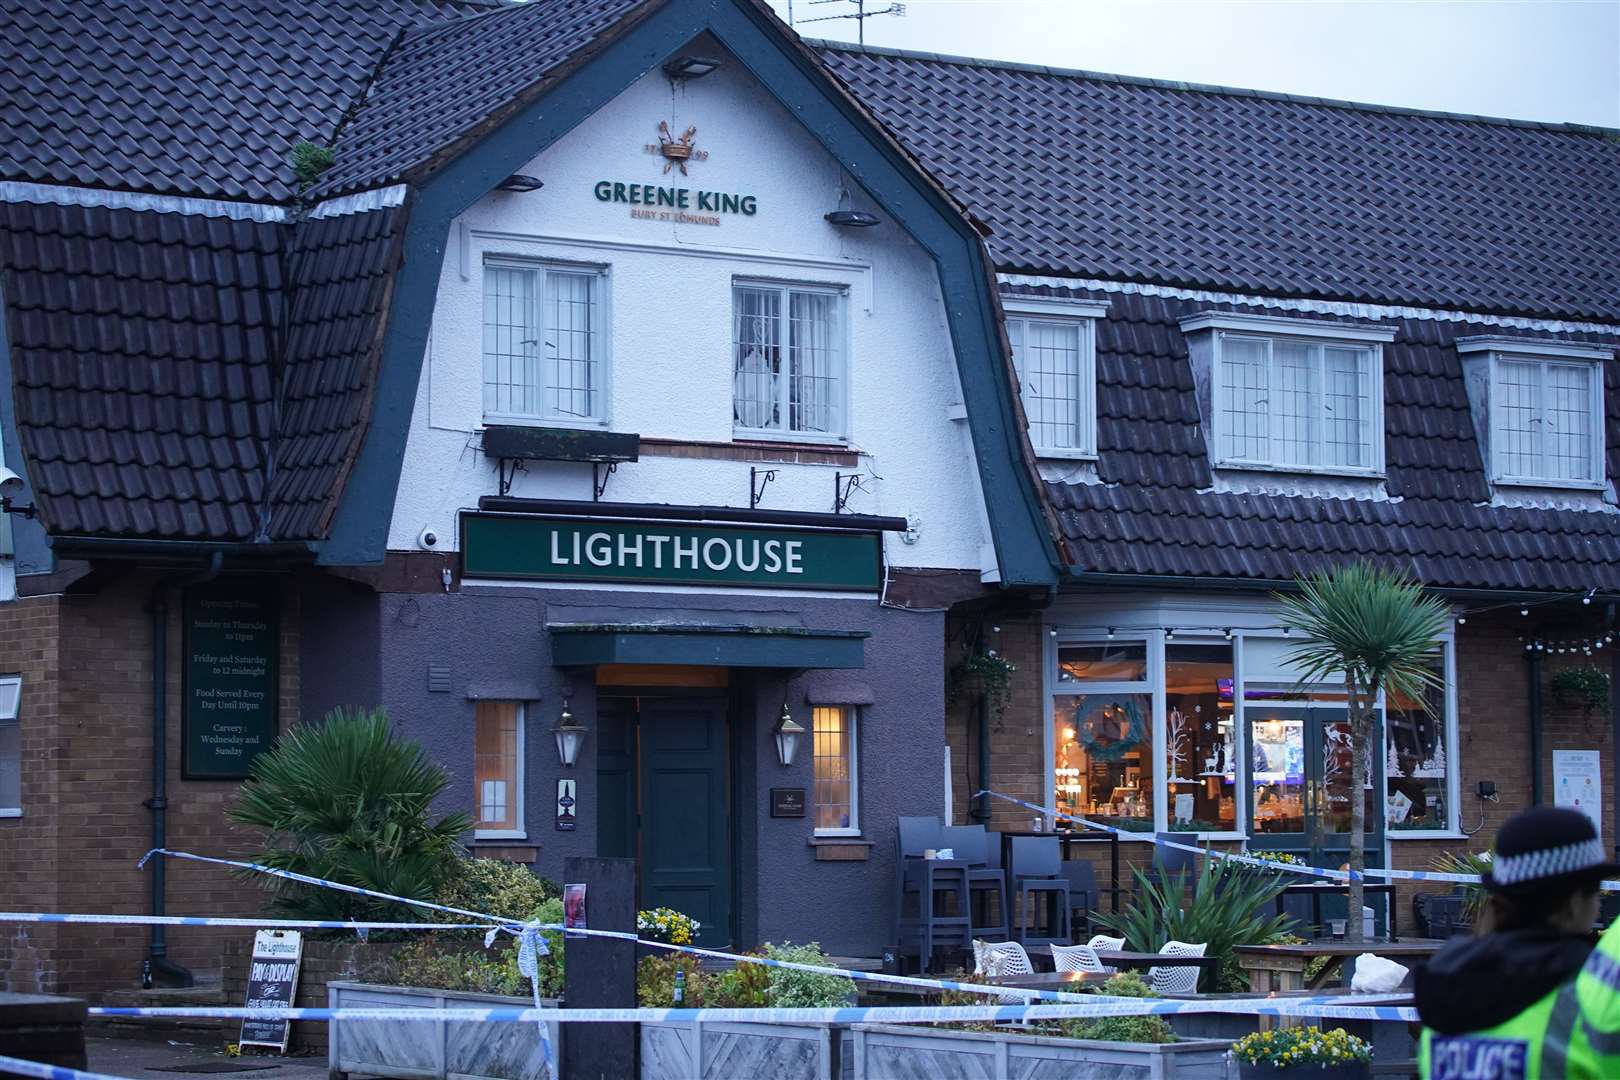 Police crime scene tape surrounds the Lighthouse Inn in Wallasey Village (Peter Byrne/PA)